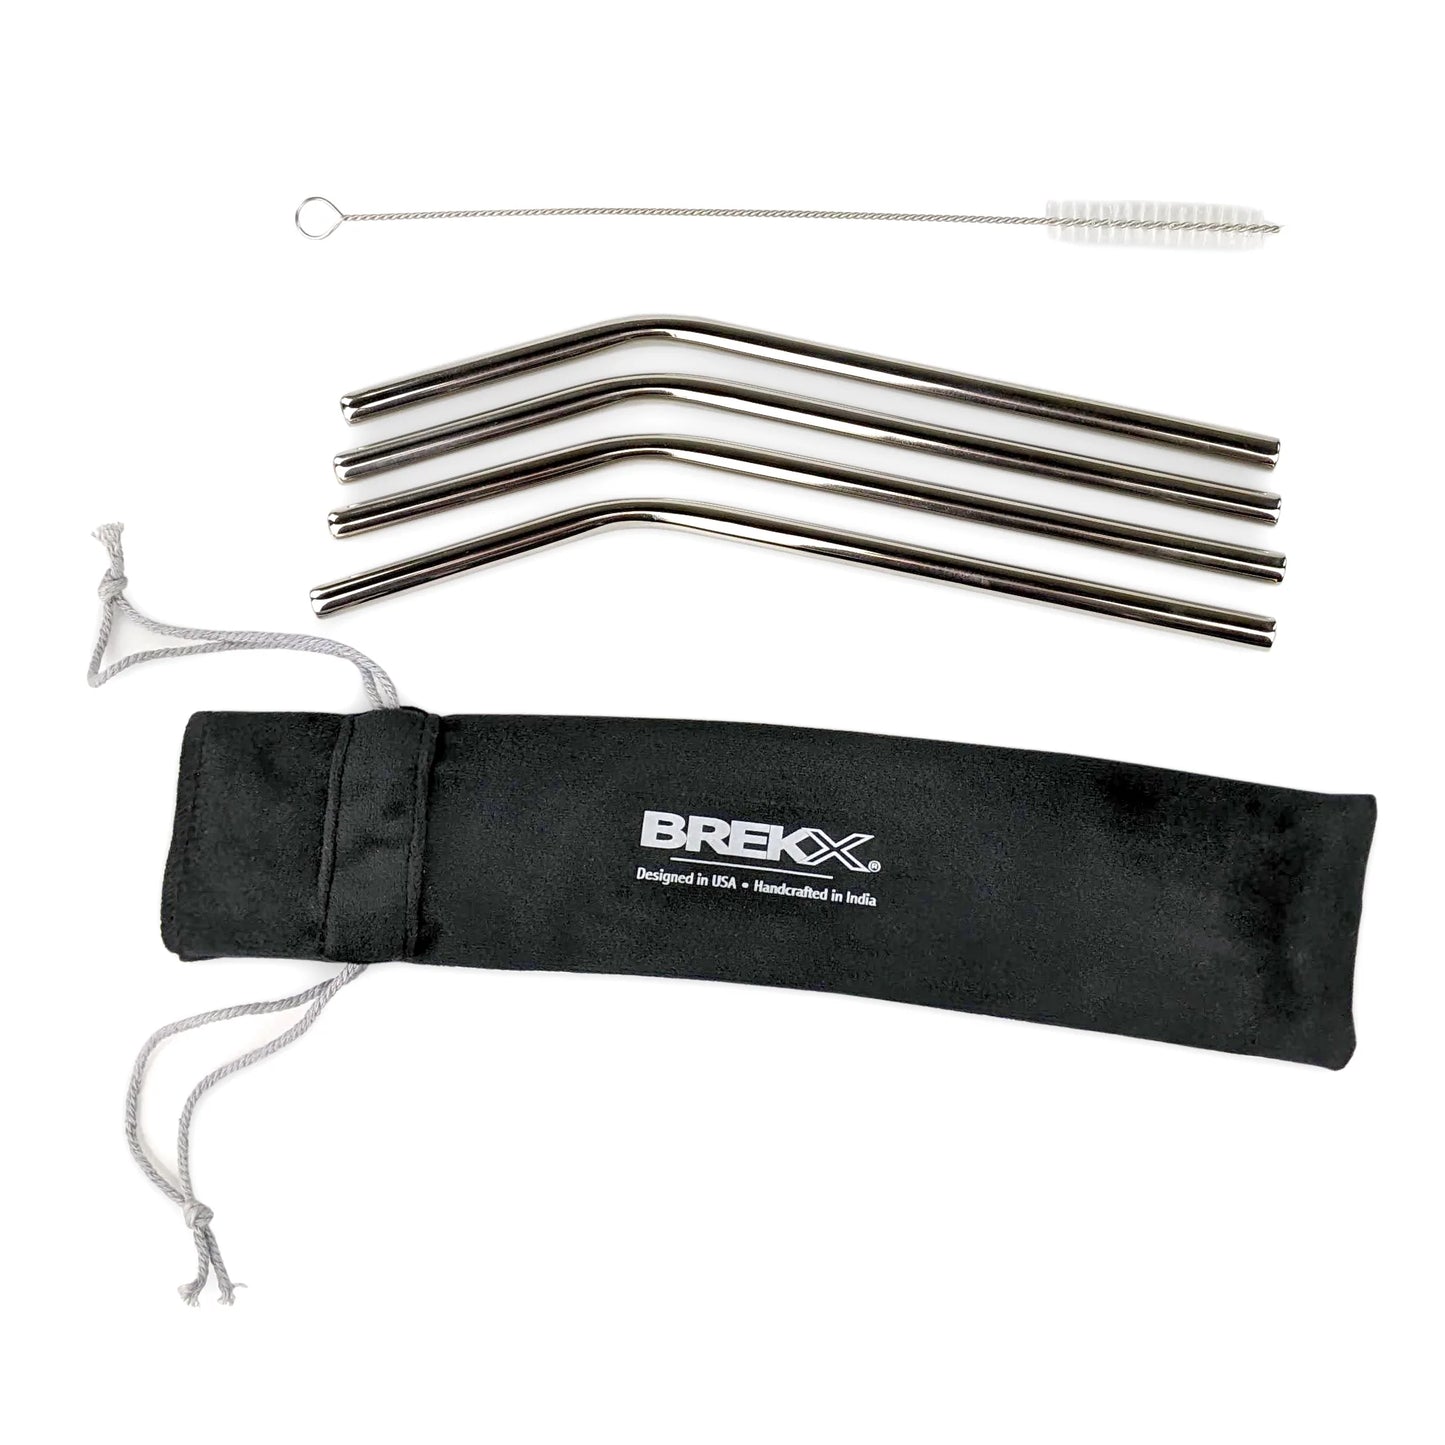 Metal drinking straws made of premium and food safe stainless steel.  Includes cleaning brush and fabric storage case to hold the set.